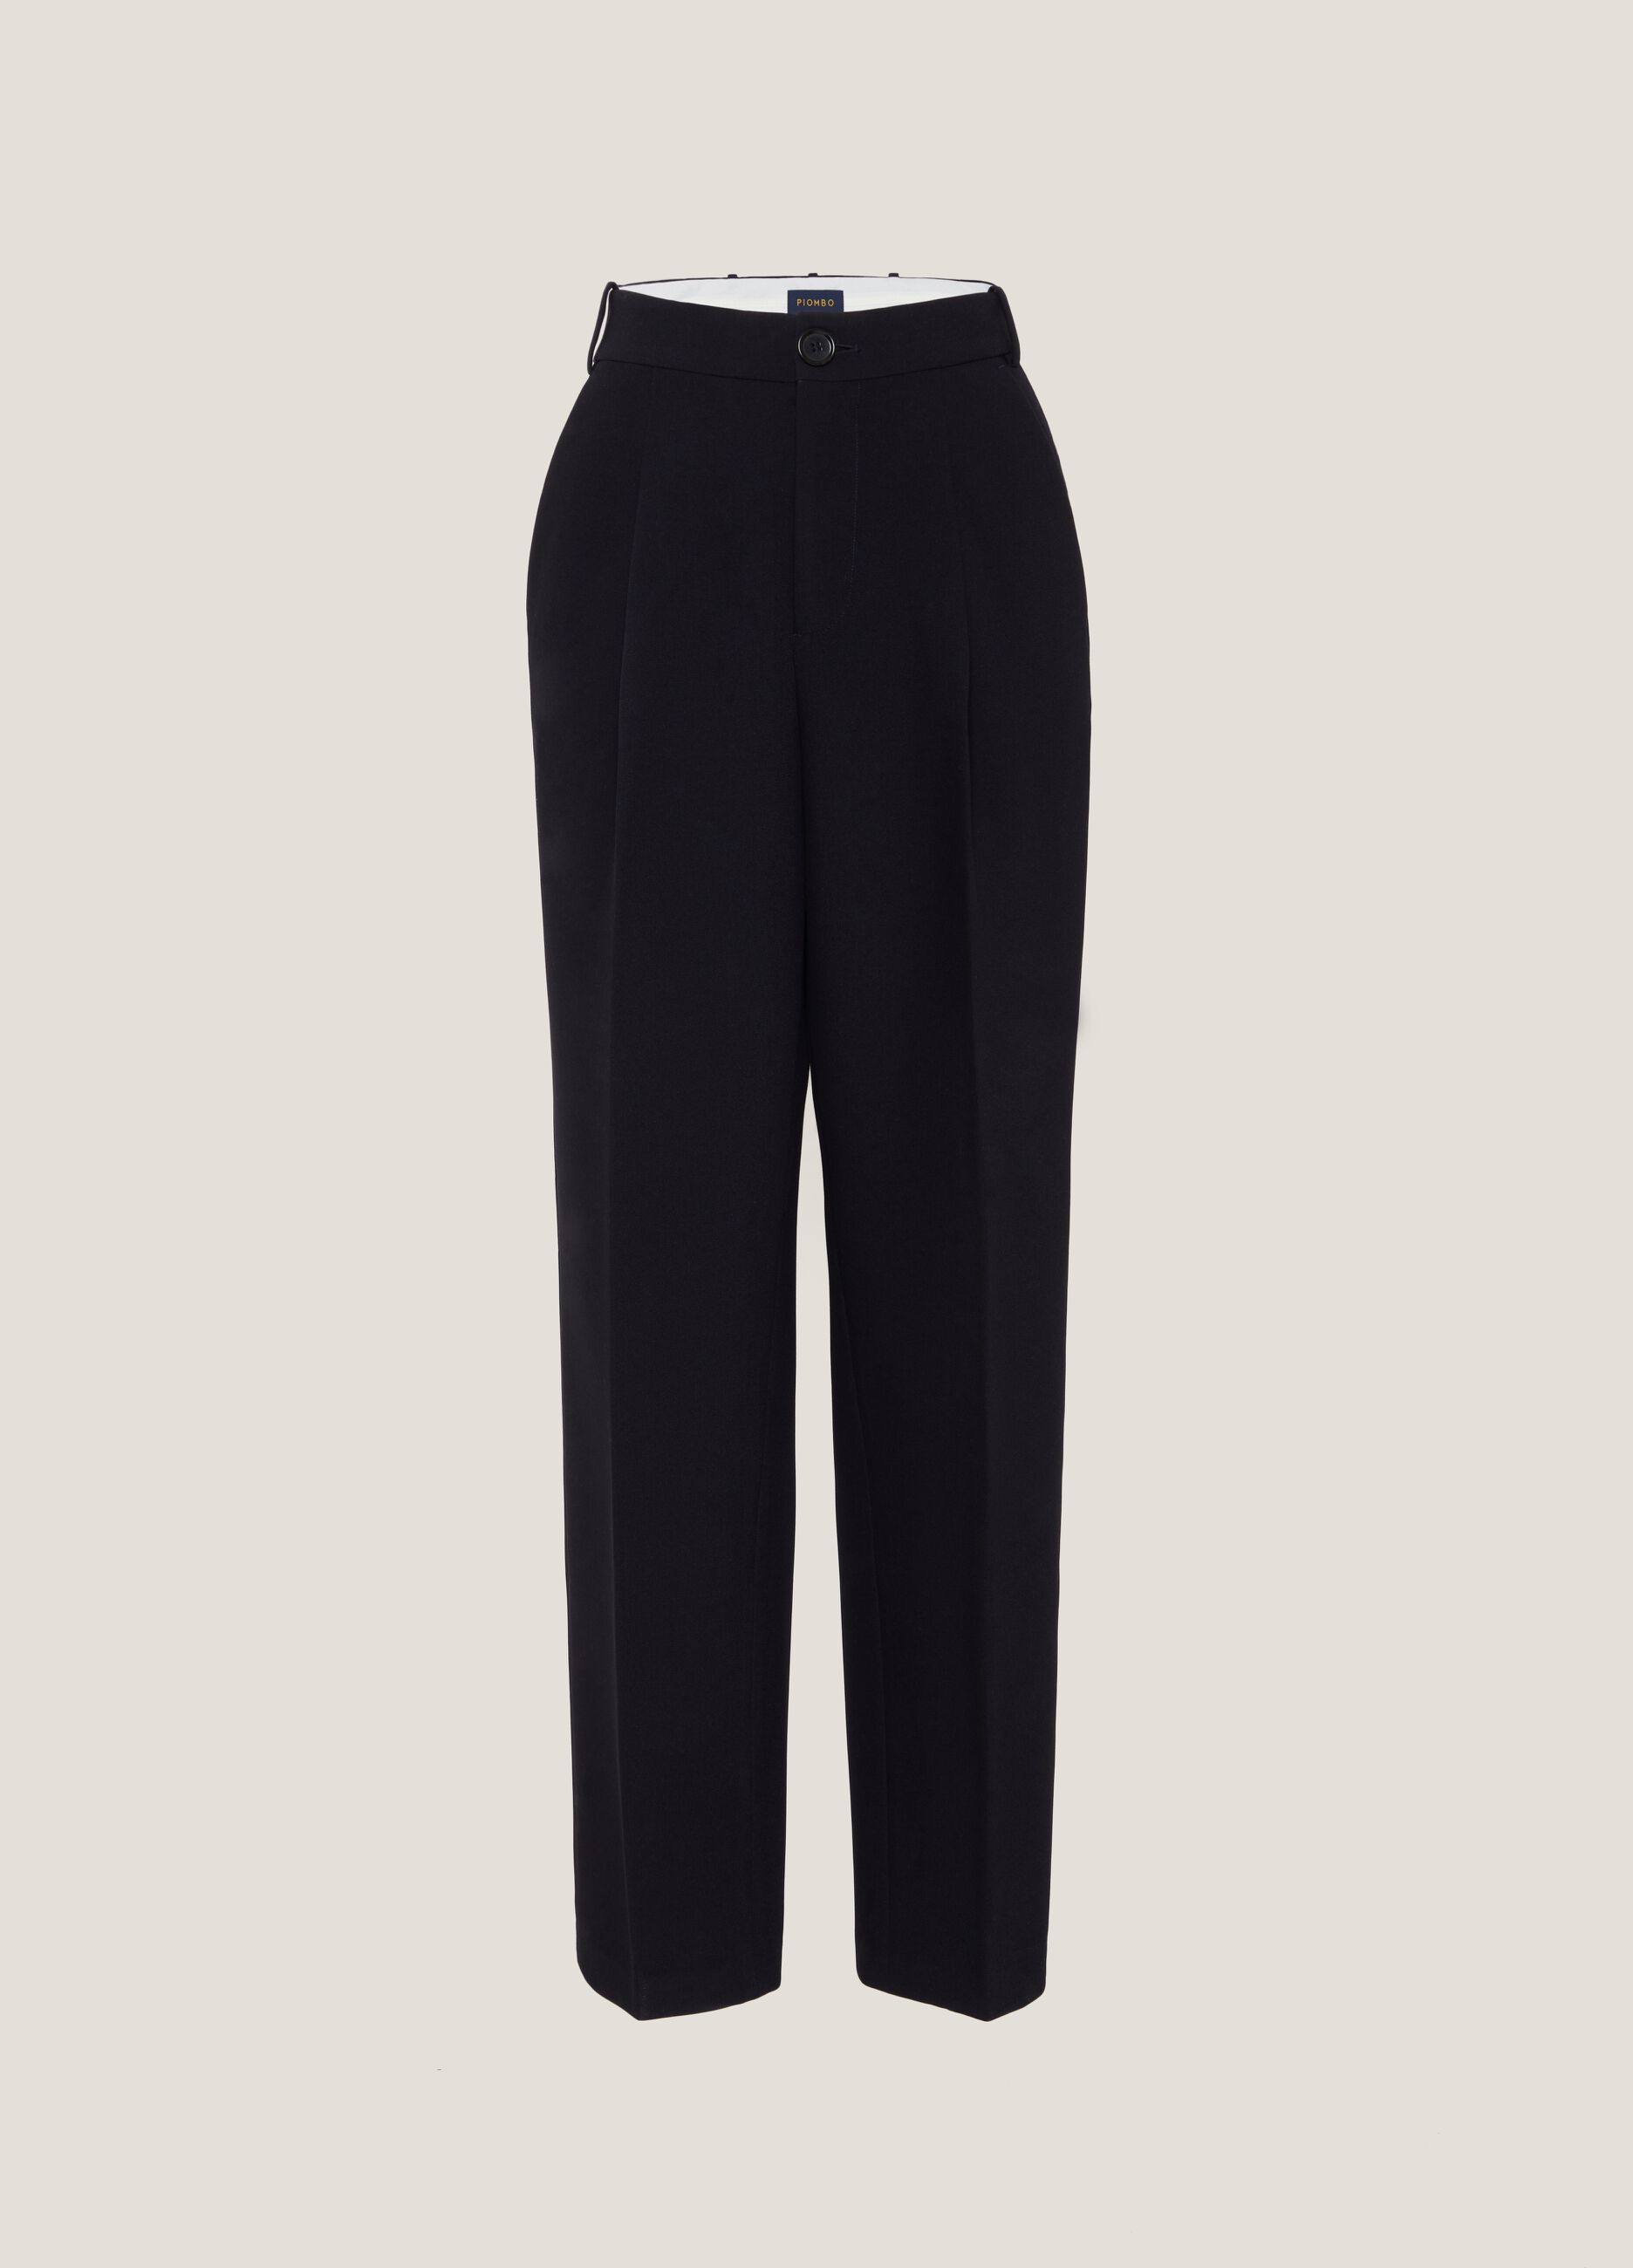 Formal trousers with darts